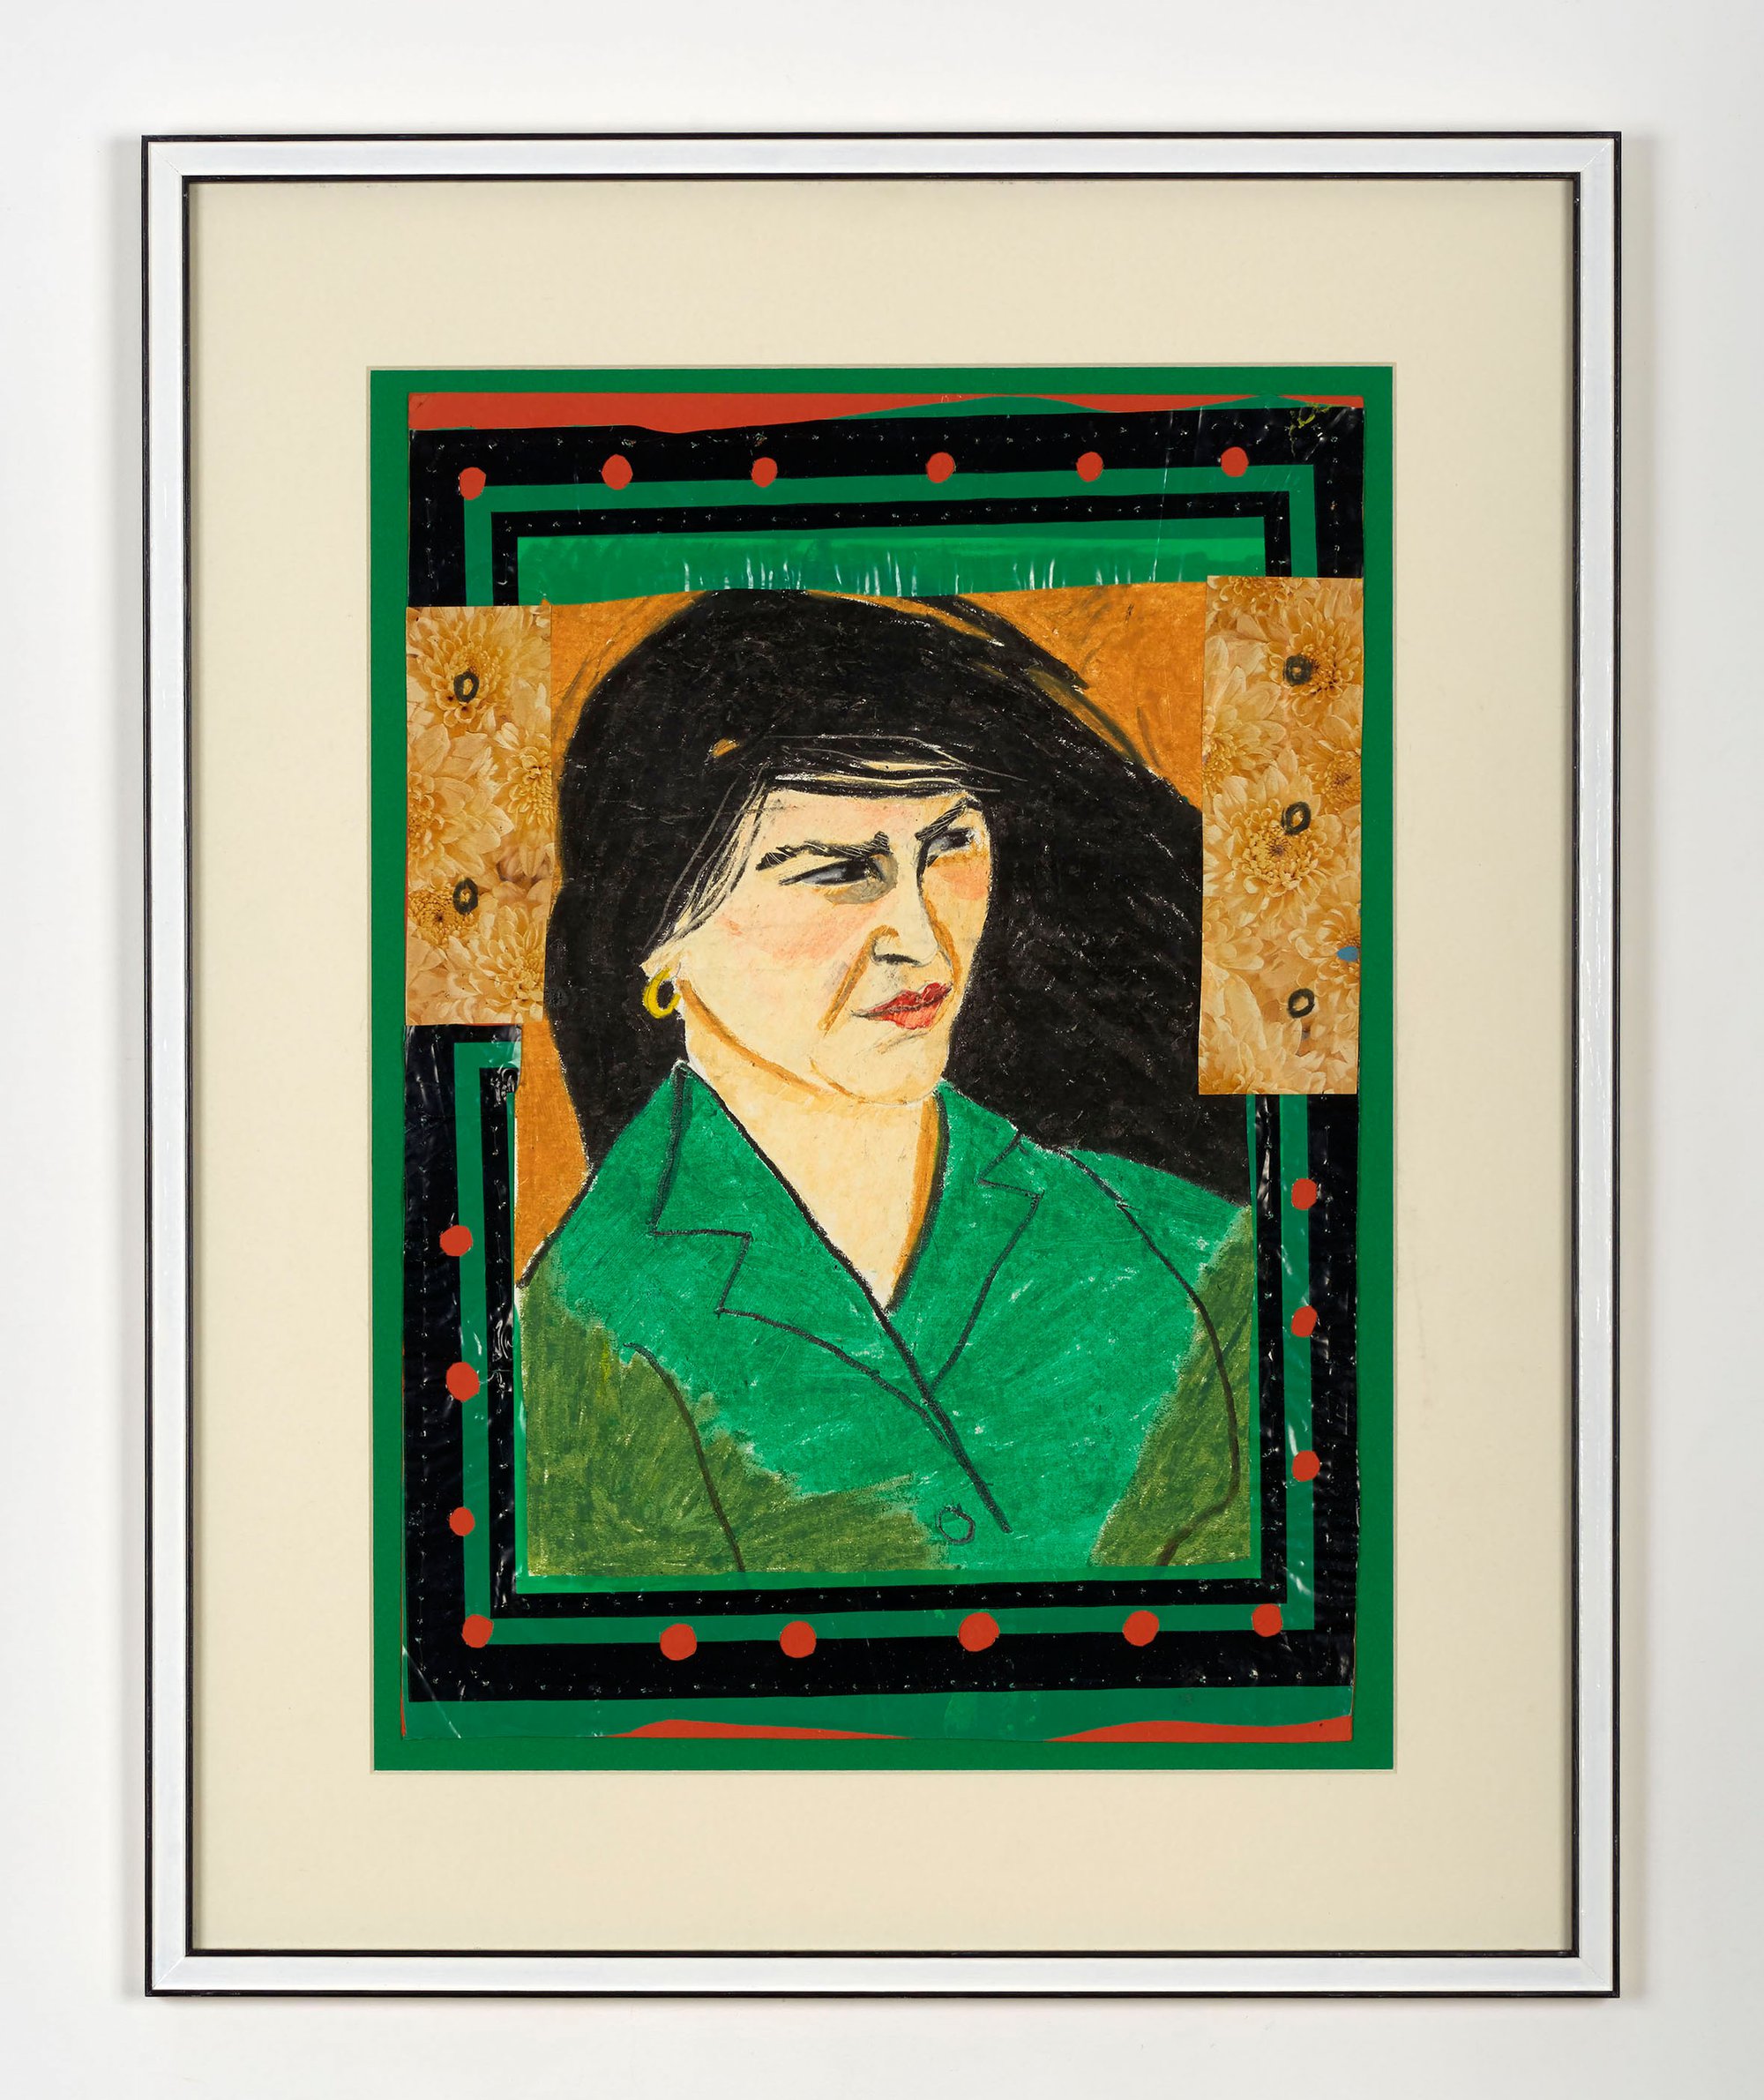 Lukas Duwenhögger, Cristina, collage on paper, 42.1 x 29.7 cm (16 5/8 x 11 3/4 in), 1982 – 1983